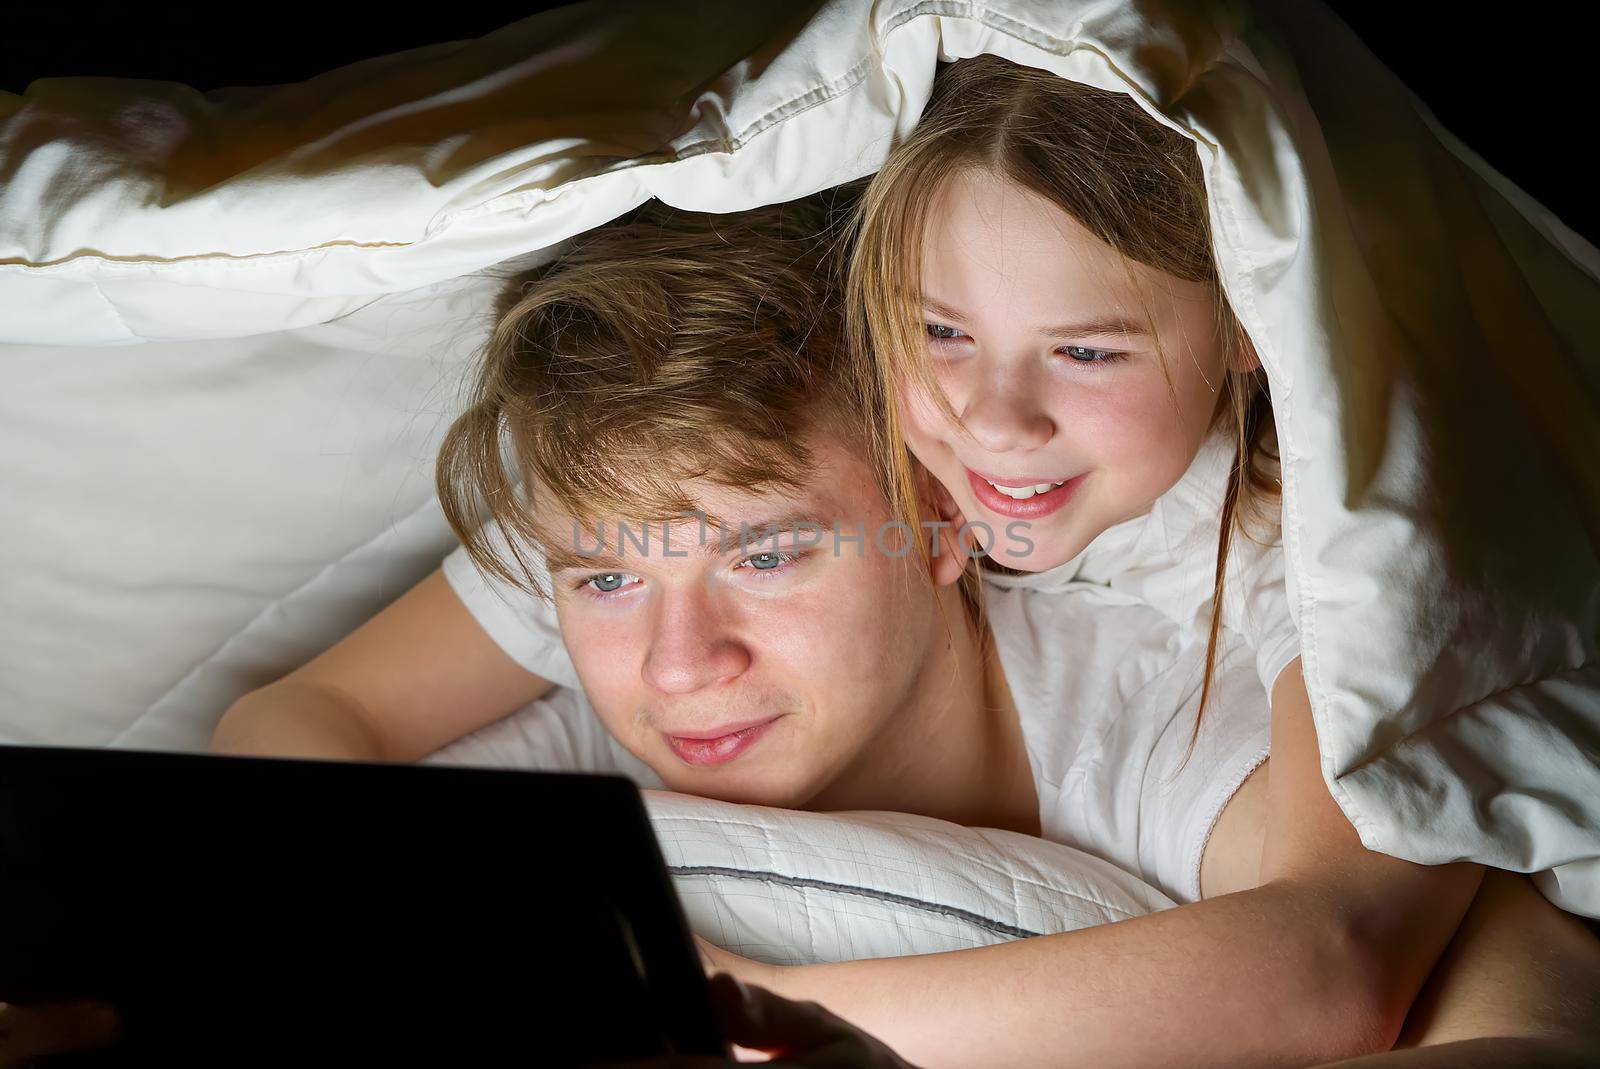 children play games on a tablet at night under a blanket, children watching video on tablet. communication through social networks. social media addiction.